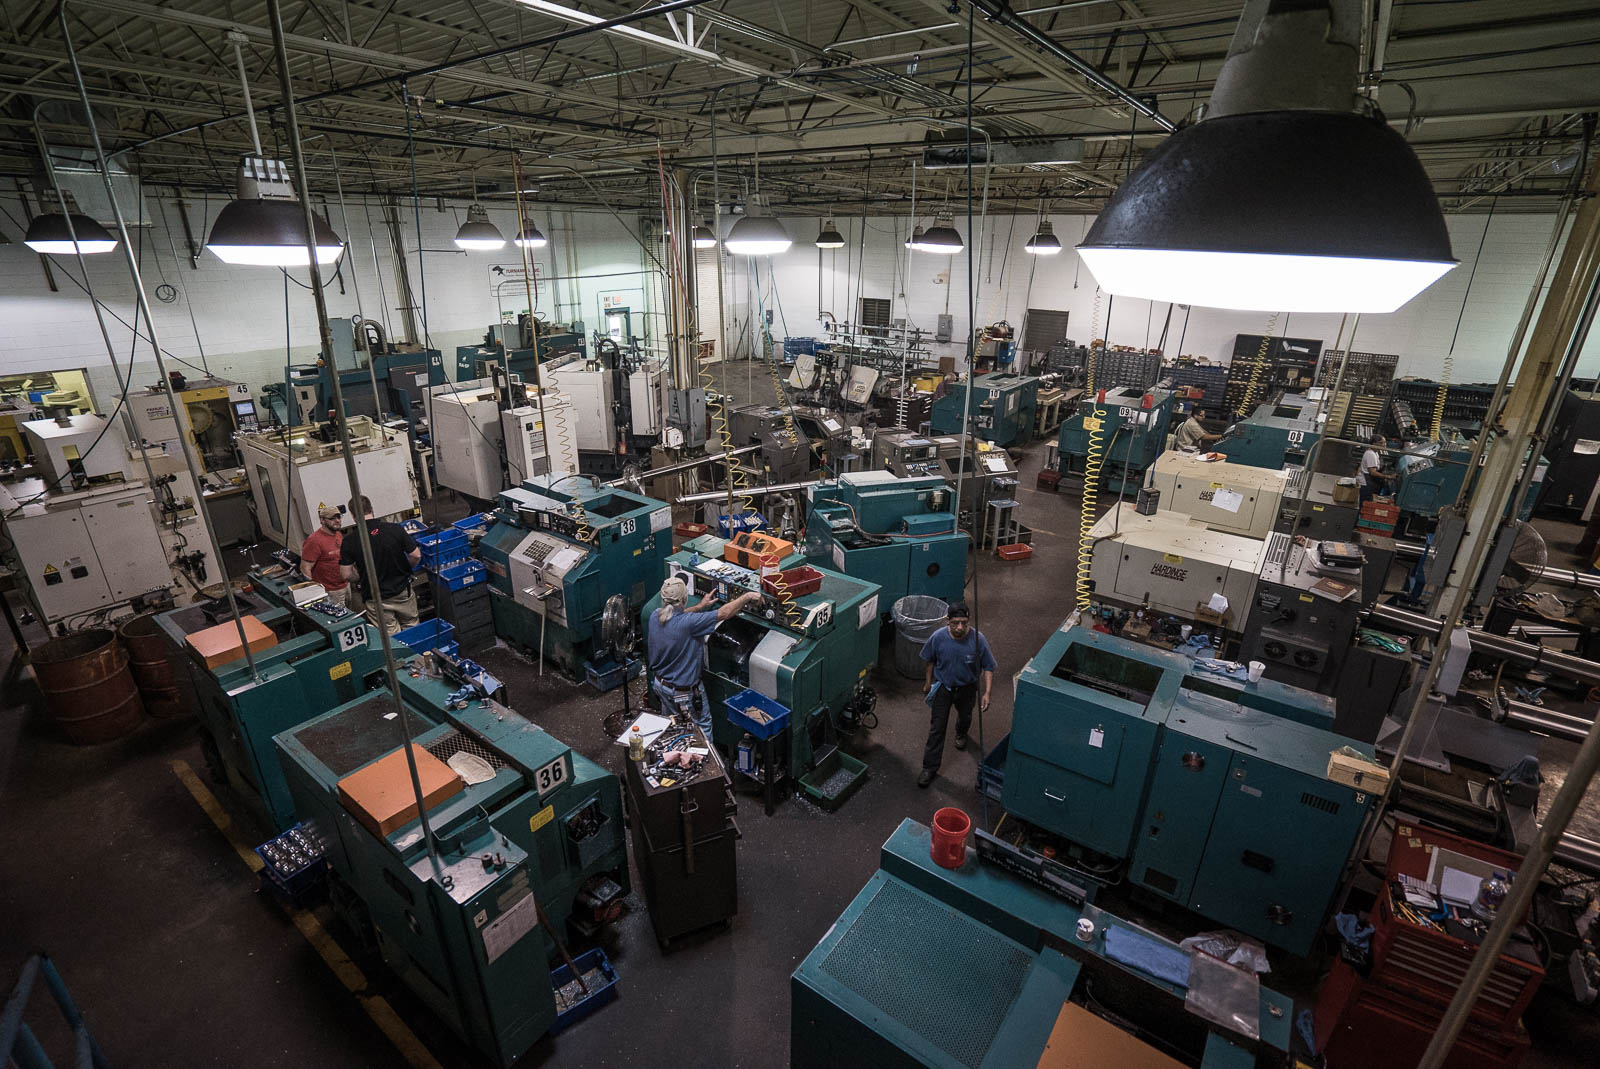 Industry Nine isn't a name without meaning.  It is the ninth business born out of this machine shop in Ashville NC, and the most successful to date.